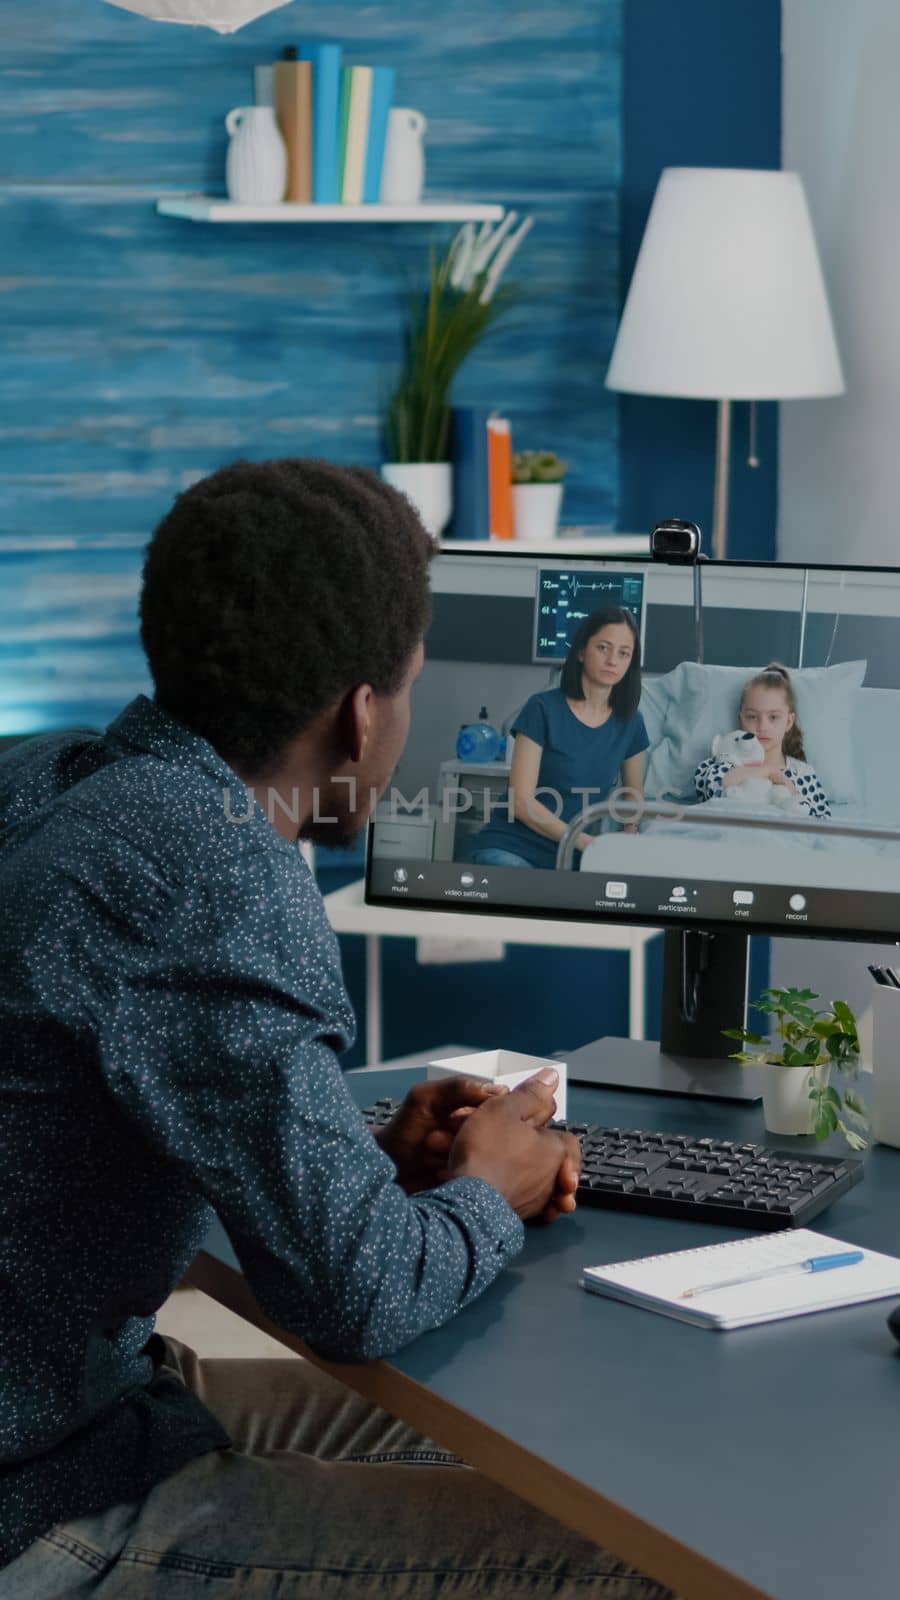 Black man talking with his family who is in hospital ward, using intenet web online teleconference video call to connect with loved ones. Webcam app remote screen healthcare consultation